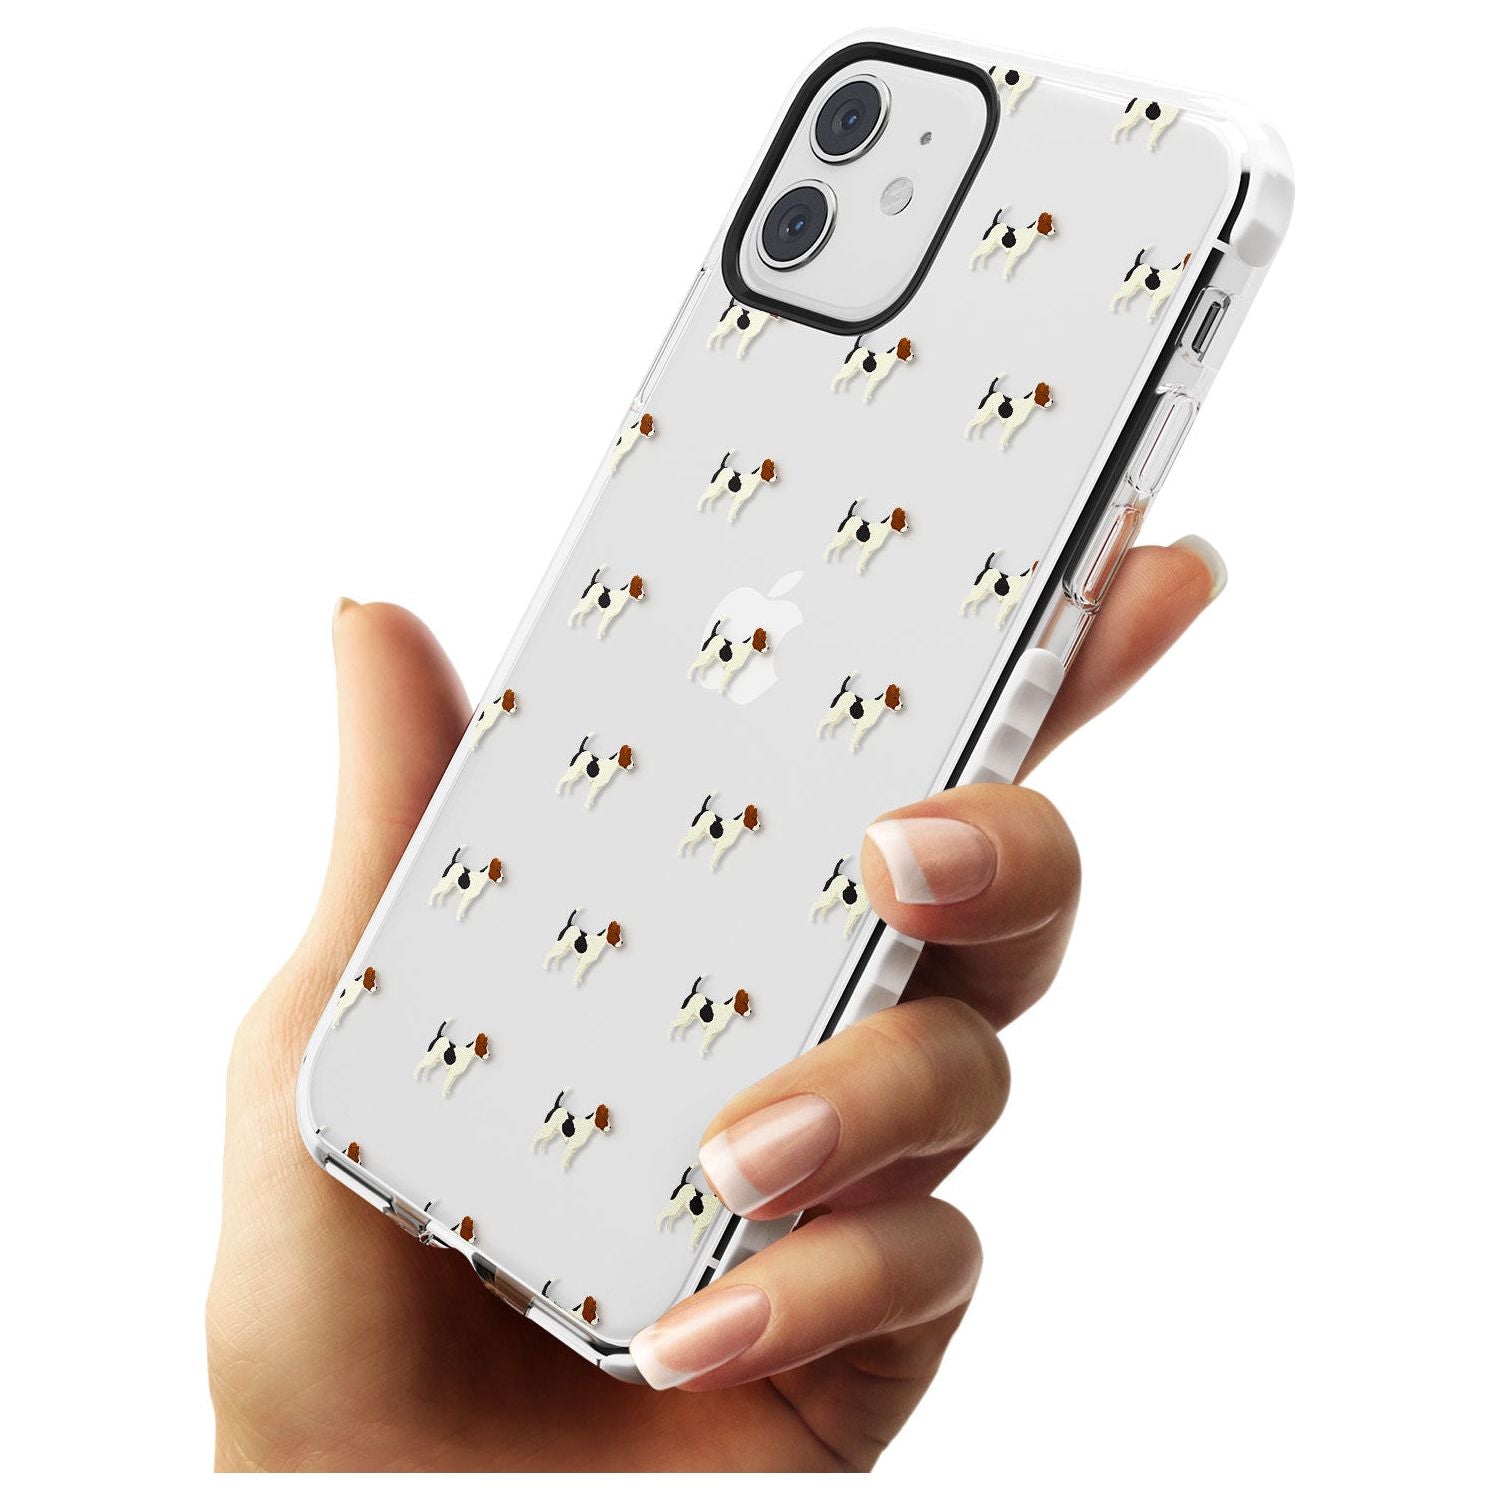 Jack Russell Terrier Dog Pattern Clear Impact Phone Case for iPhone 11